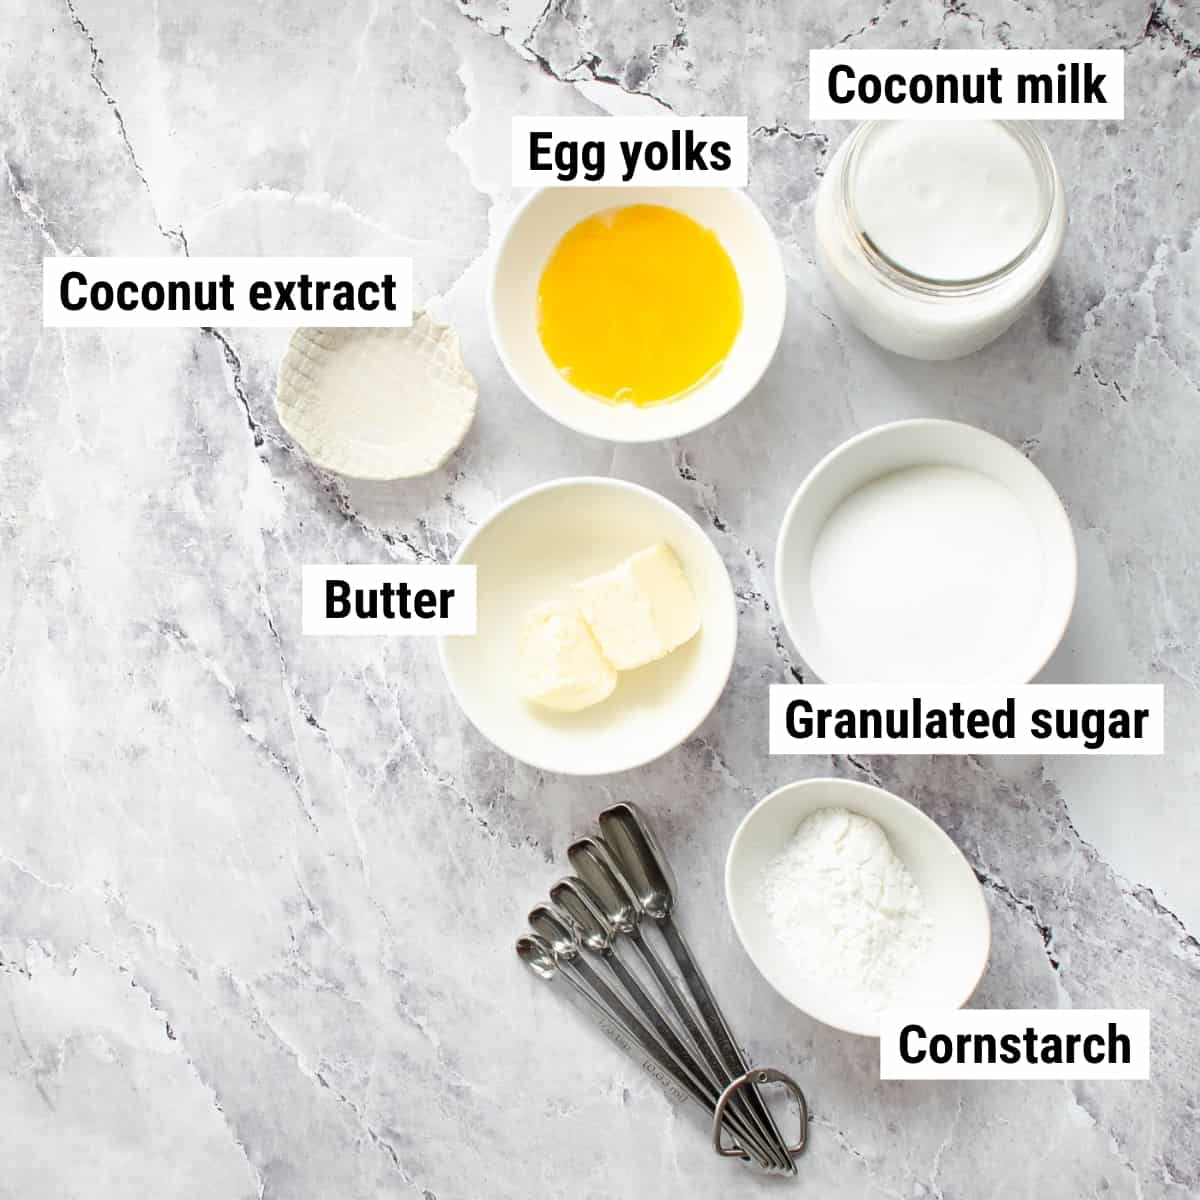 The ingredients to make coconut pudding.